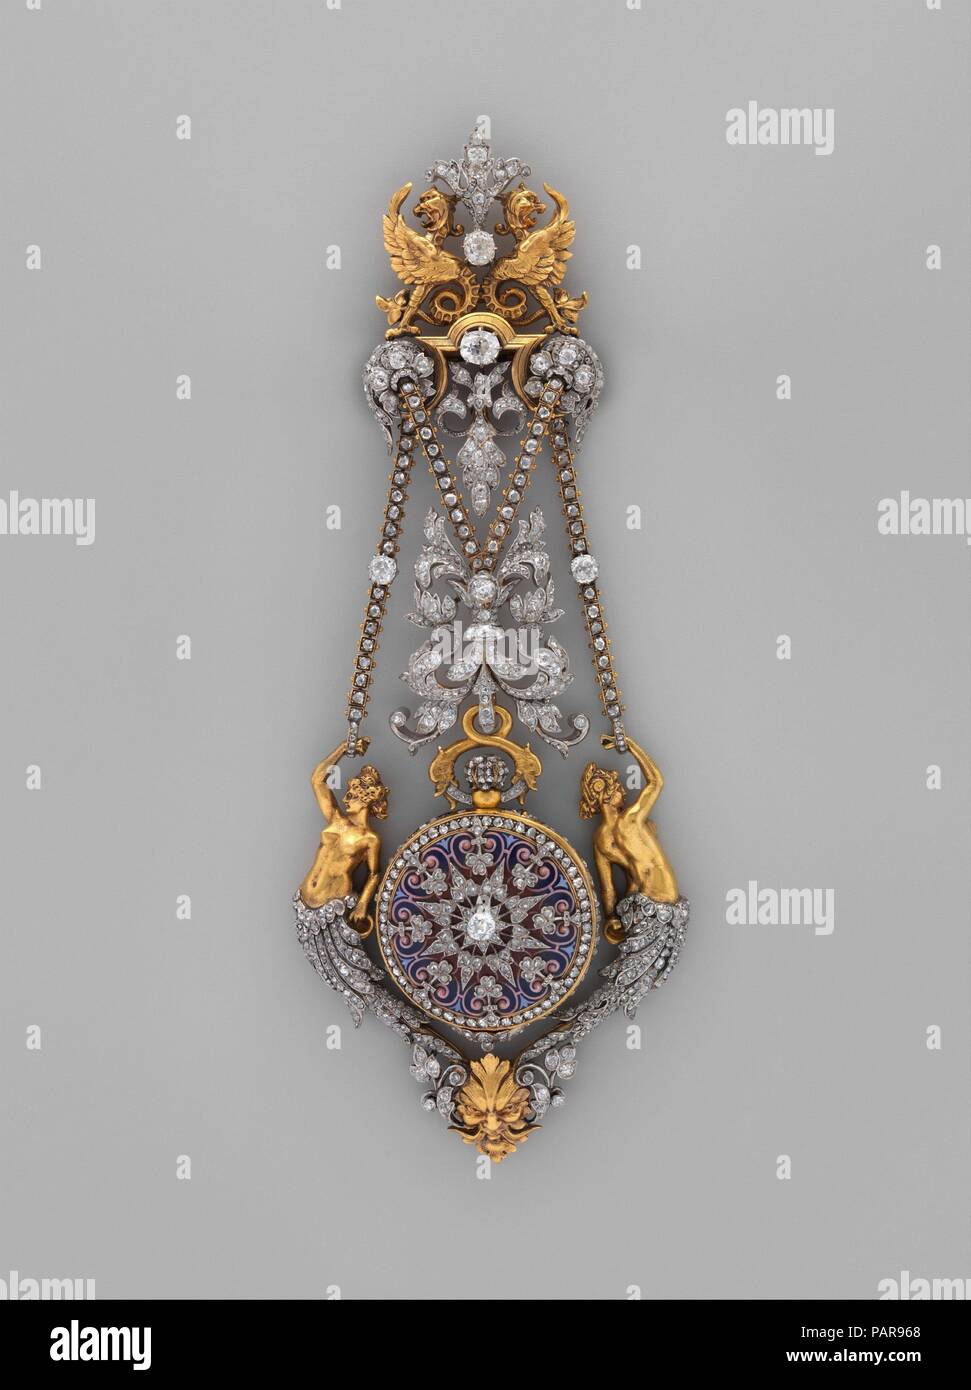 Watch and chatelaine. Culture: French, Paris. Dimensions: Overall: 6 1/4 ×  2 3/8 in. (15.9 × 6 cm); Diameter (back plate): 1 1/16 in. (2.7 cm). Maker:  Case maker: Hippolyte Téterger (French,